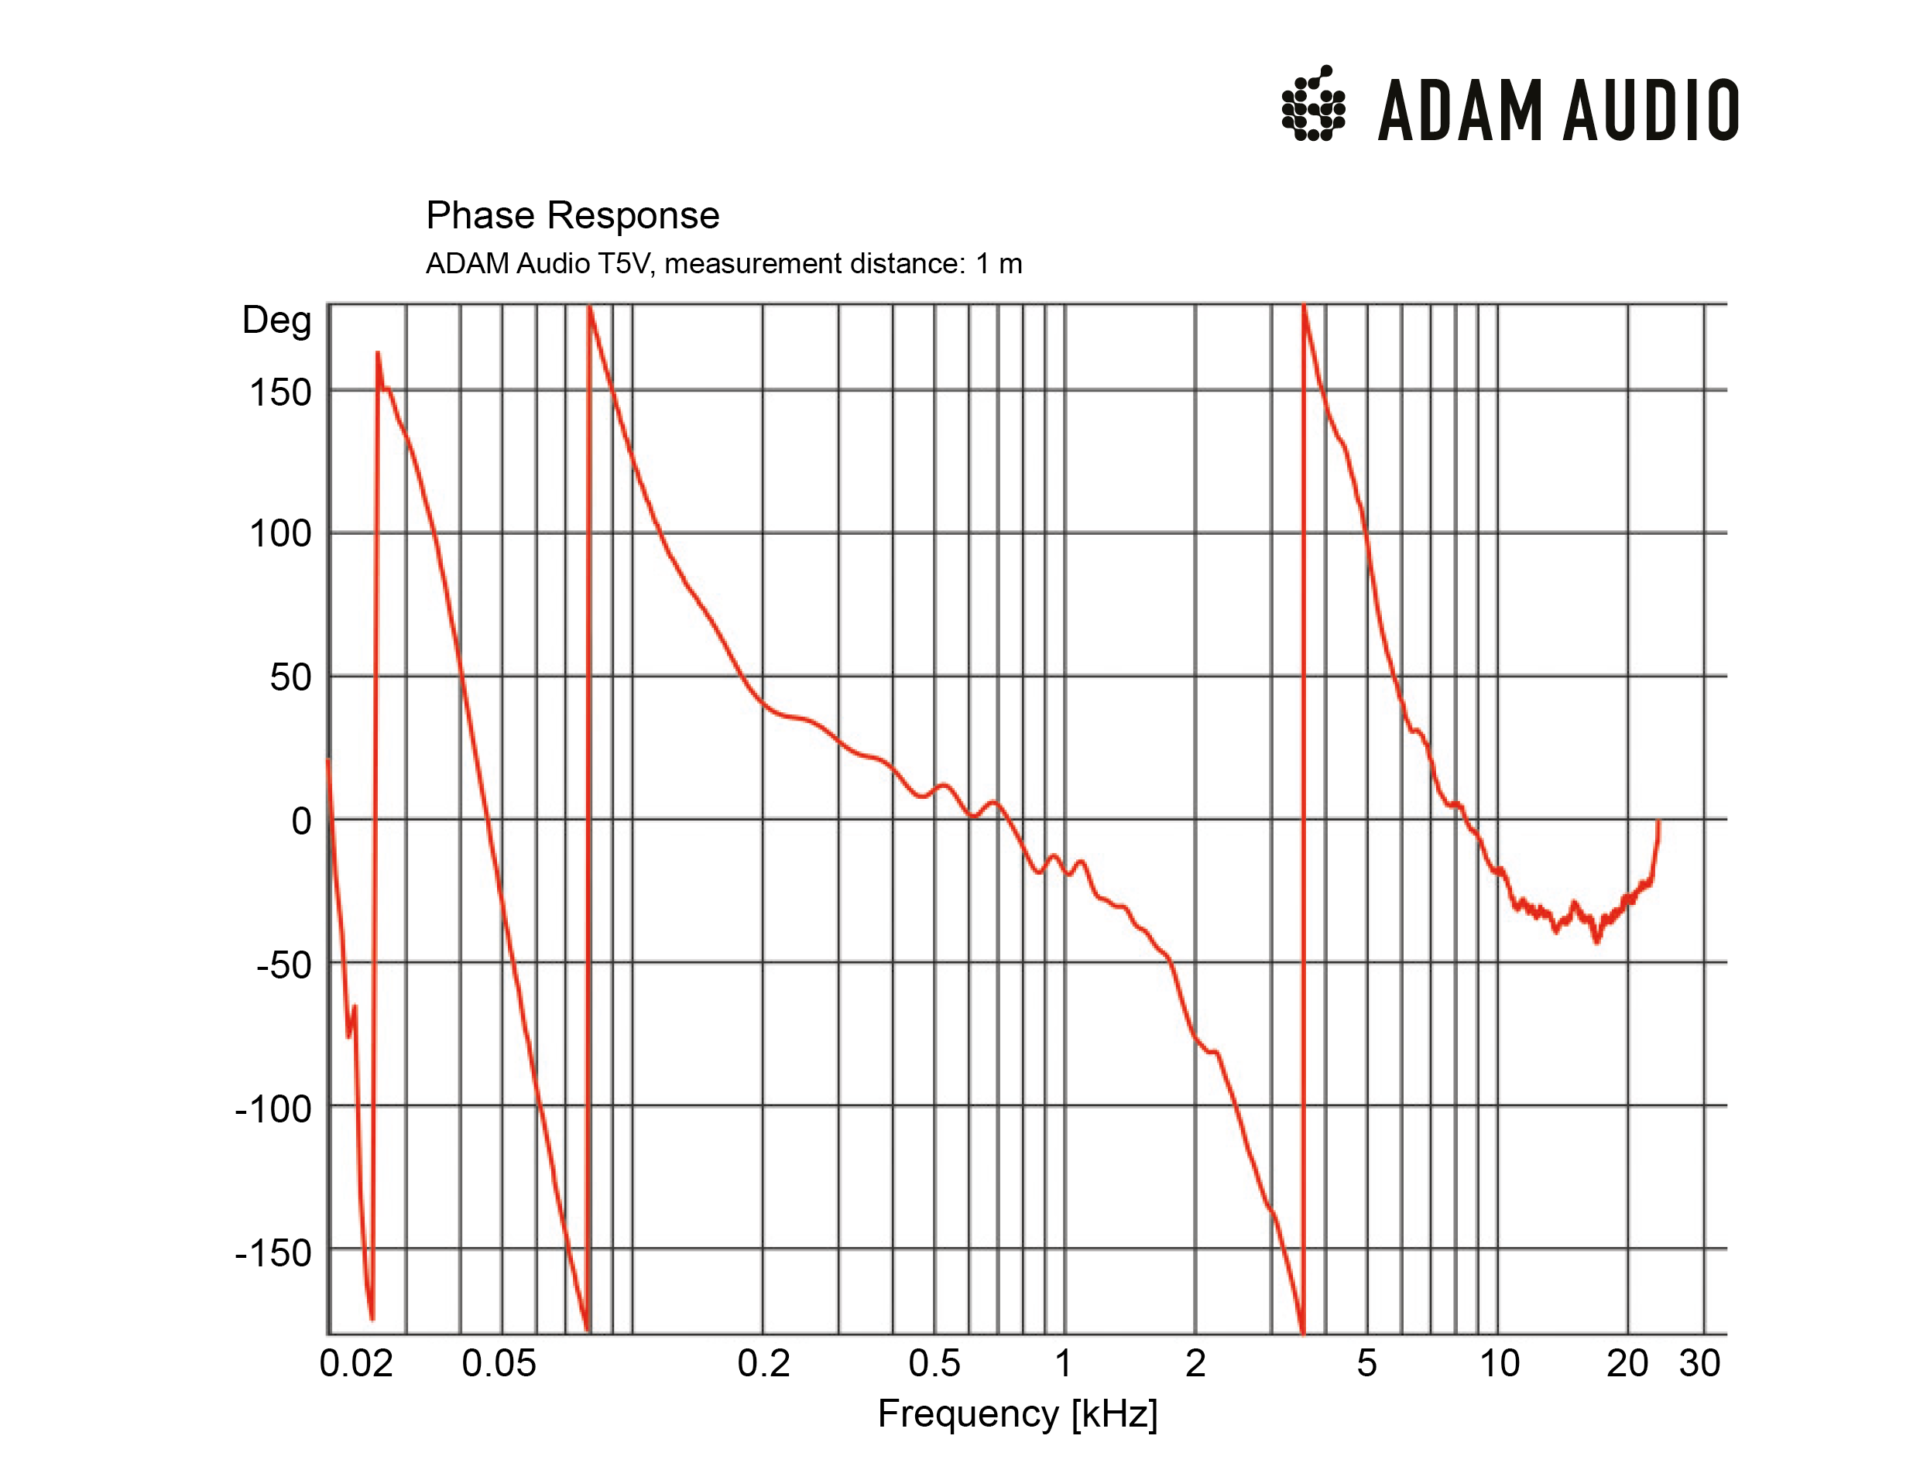 Adam Audio t5v АЧХ. GS Audio gd5 Frequency response. Adam Audio t7v Mensions. WPT Frequency range. V frequency